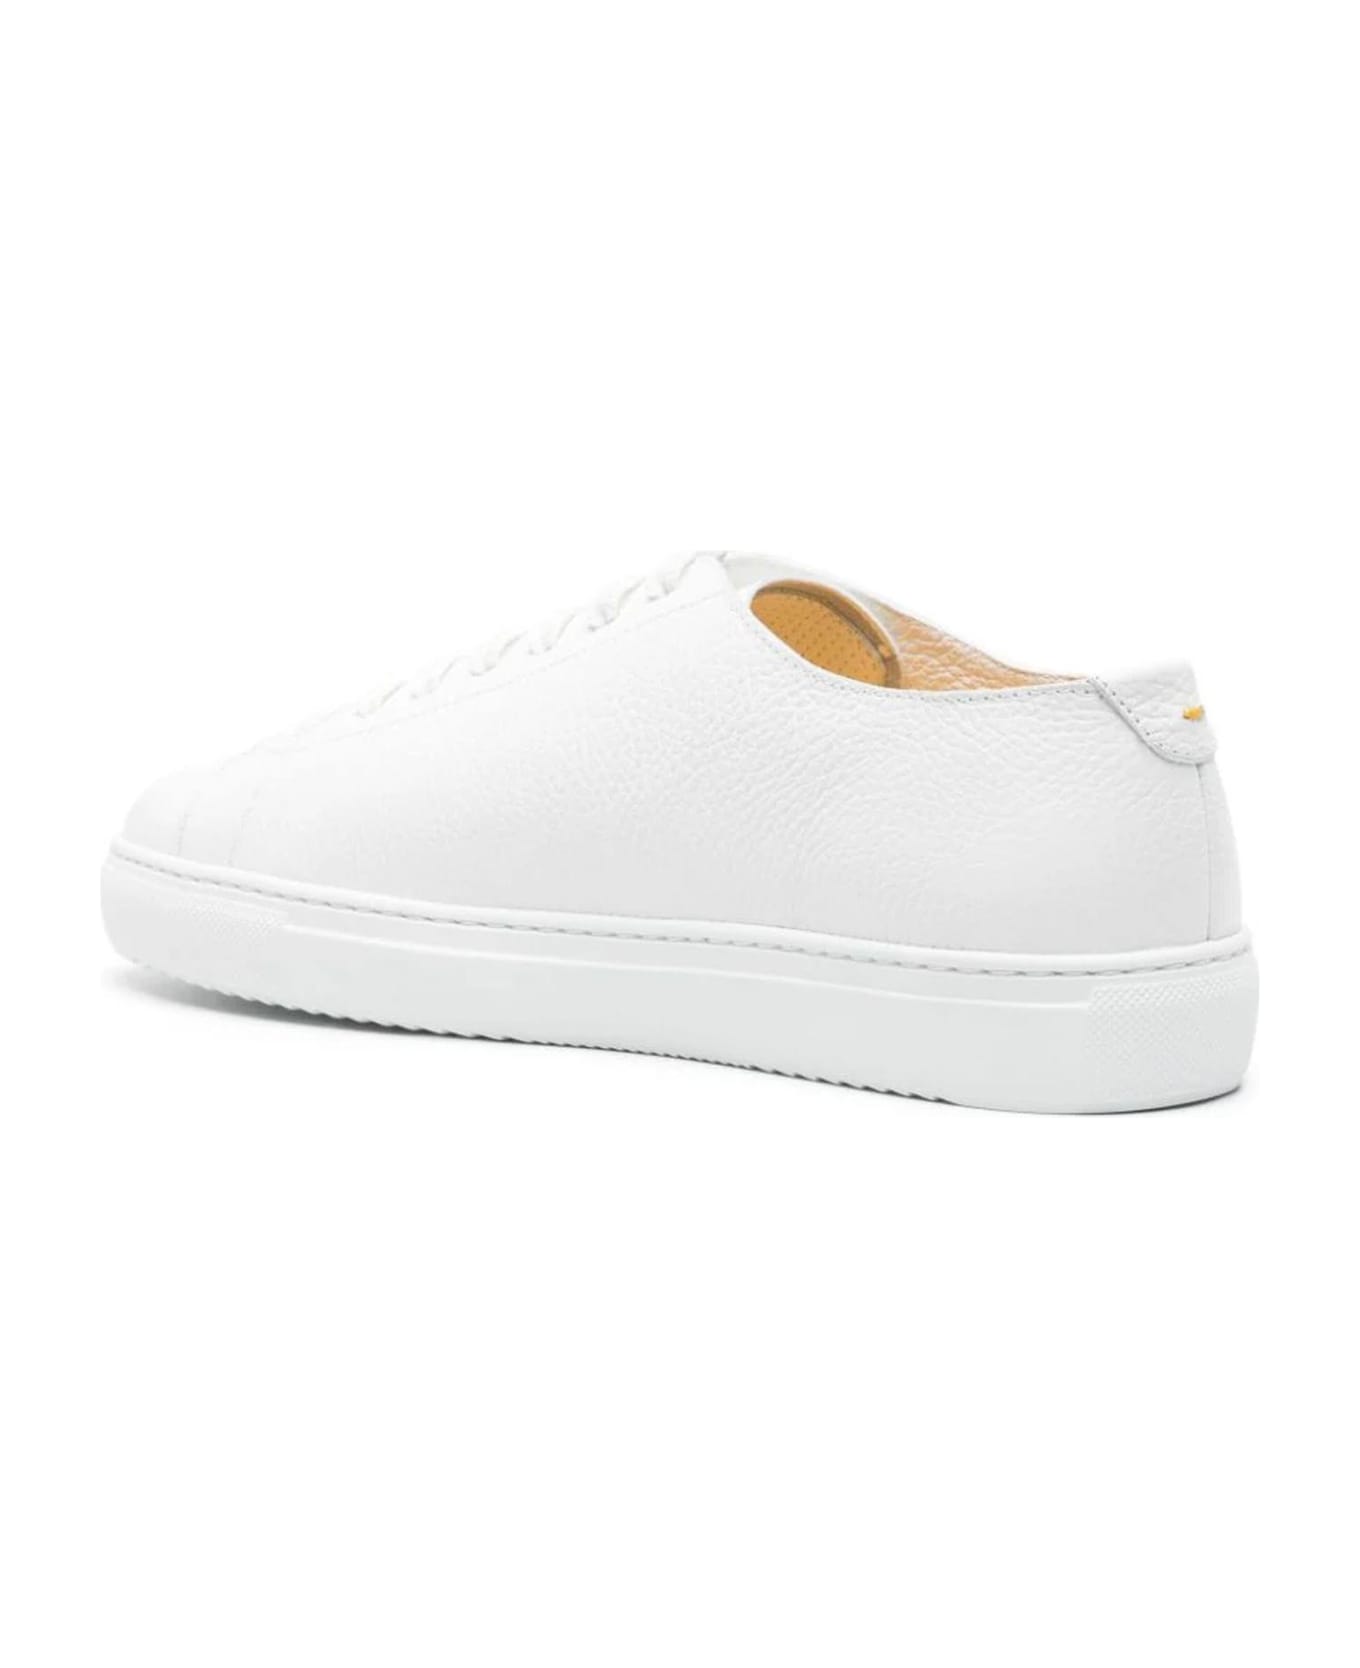 Doucal's White Calf Leather Sneakers